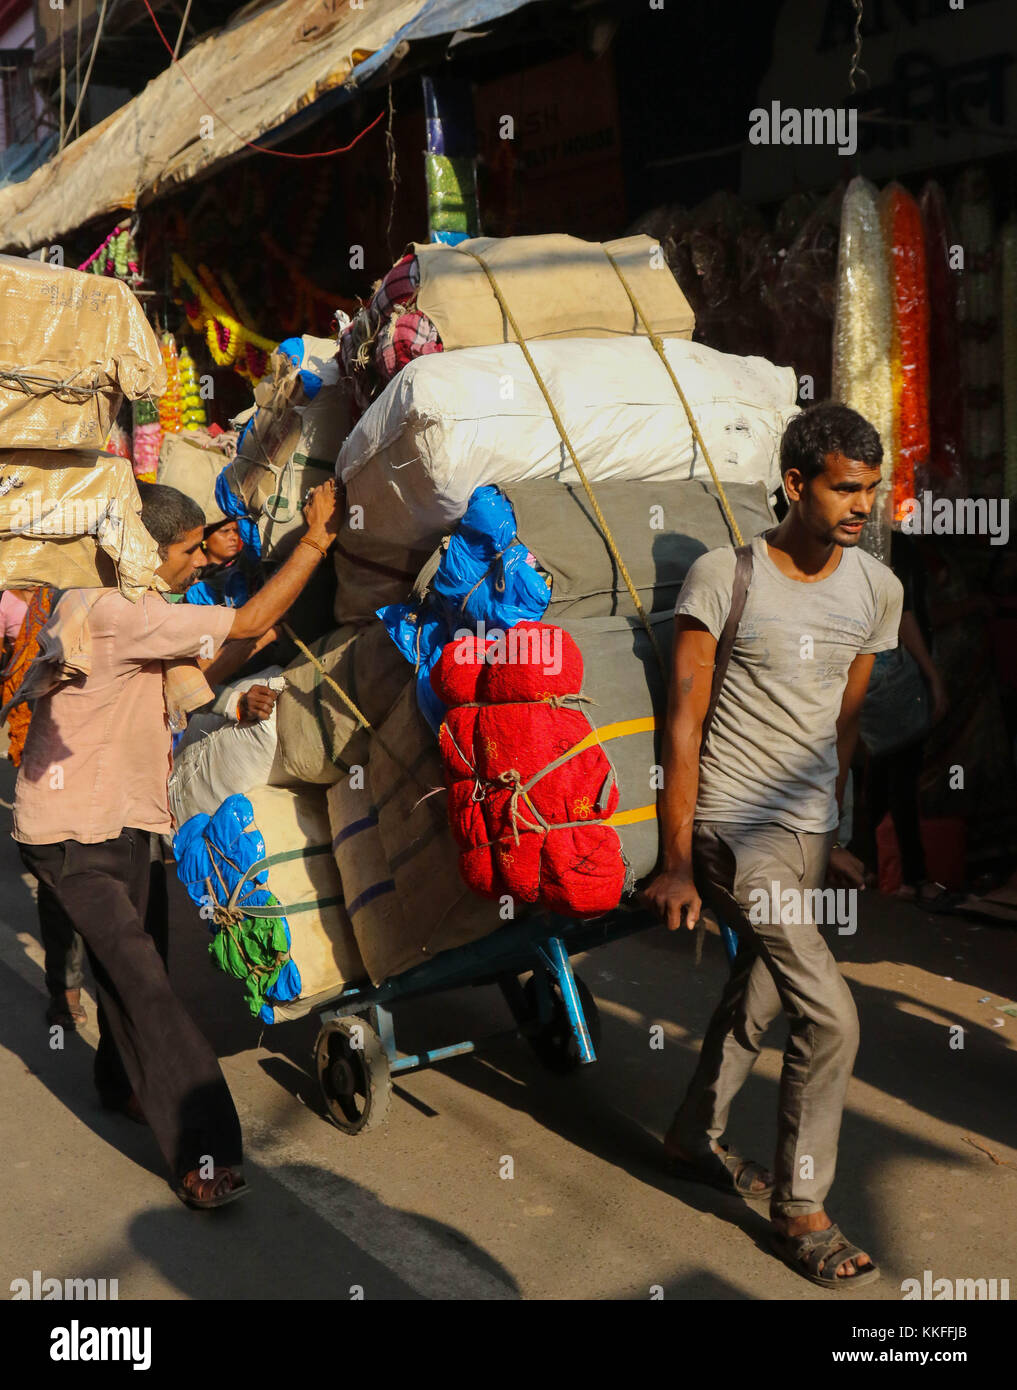 Transporting heavy goods by cart in the streets of Mumbai, India Stock Photo